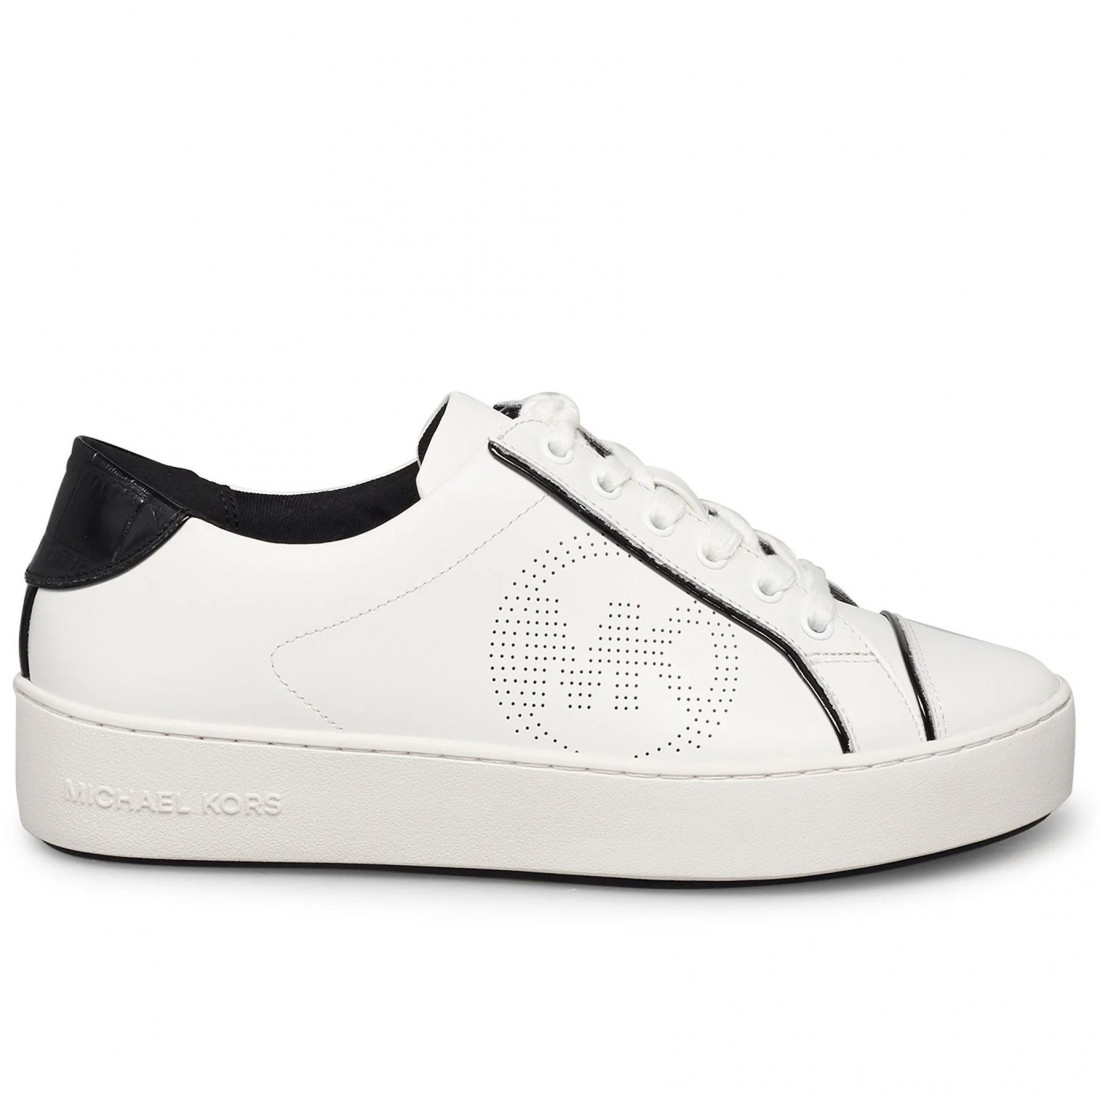 black and white michael kors sneakers